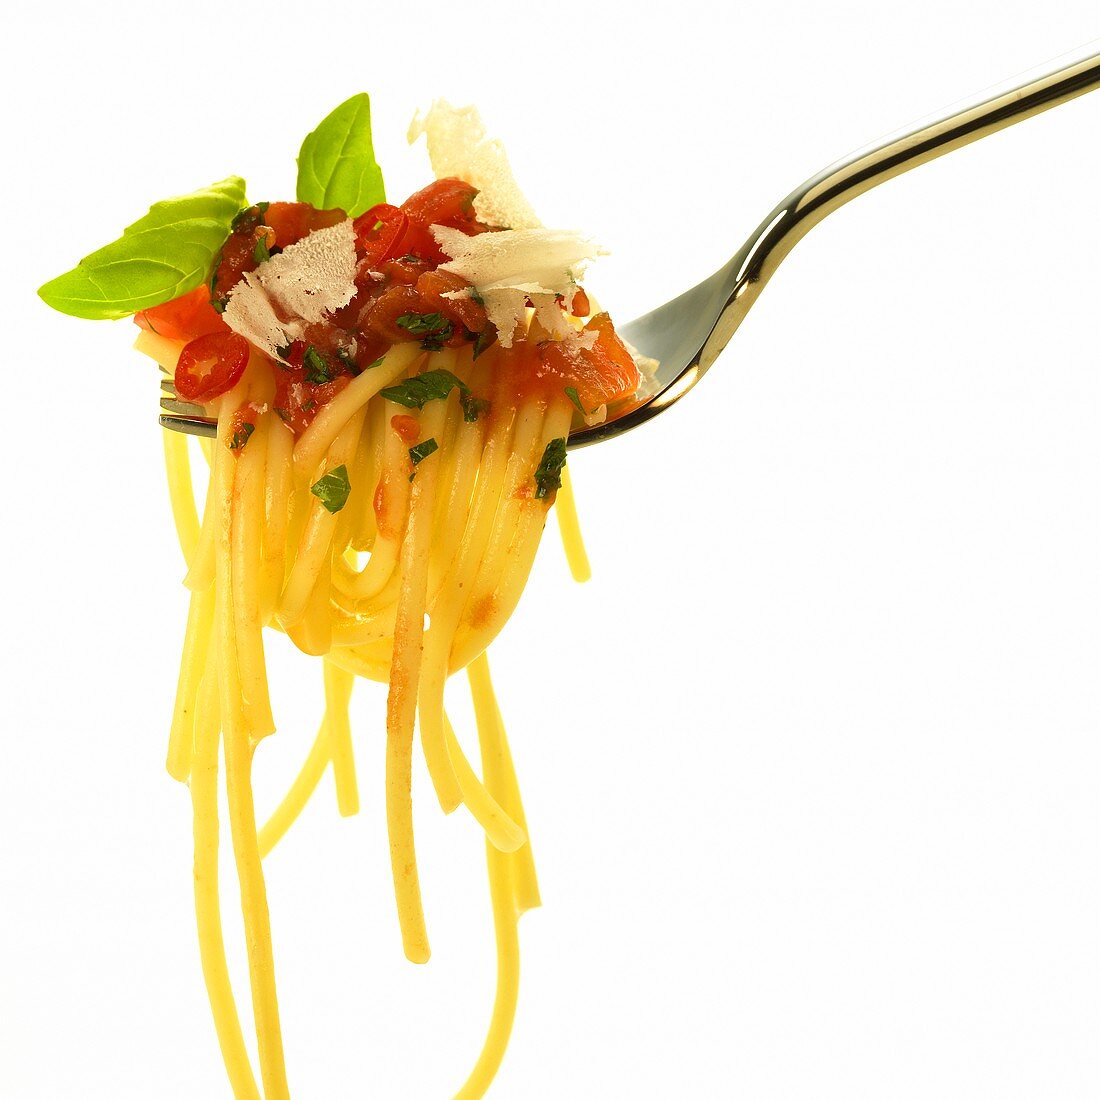 Spaghetti with tomato and chili sauce and Parmesan on fork